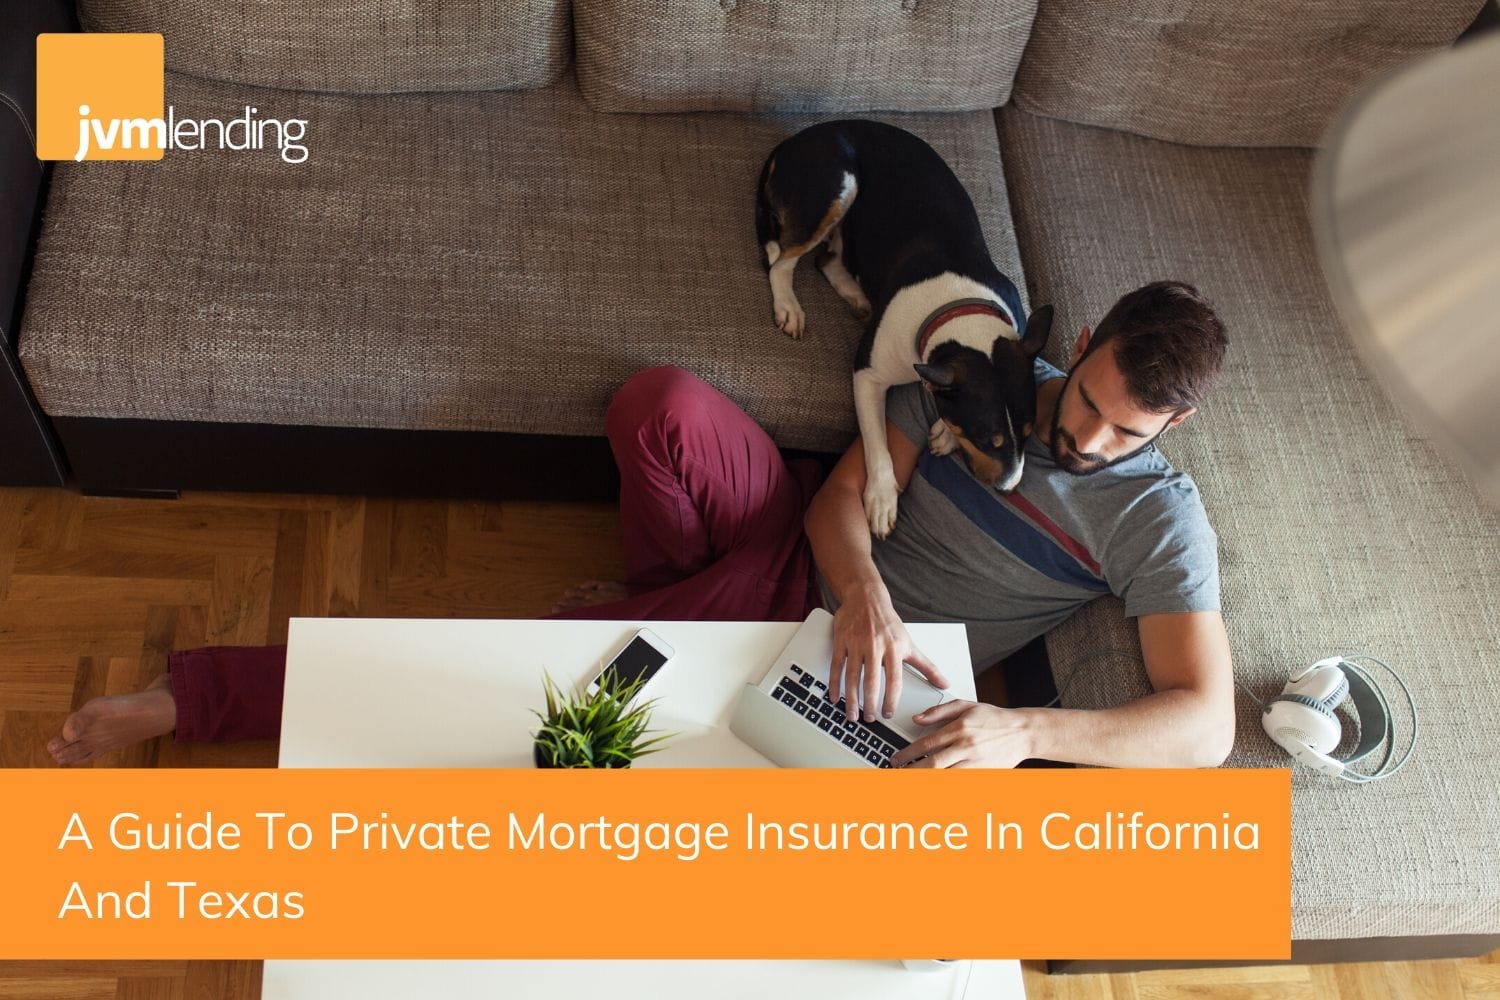 A homeowner in California works on a loan application to refinance his mortgage and eliminate his Private Mortgage Insurance (PMI).